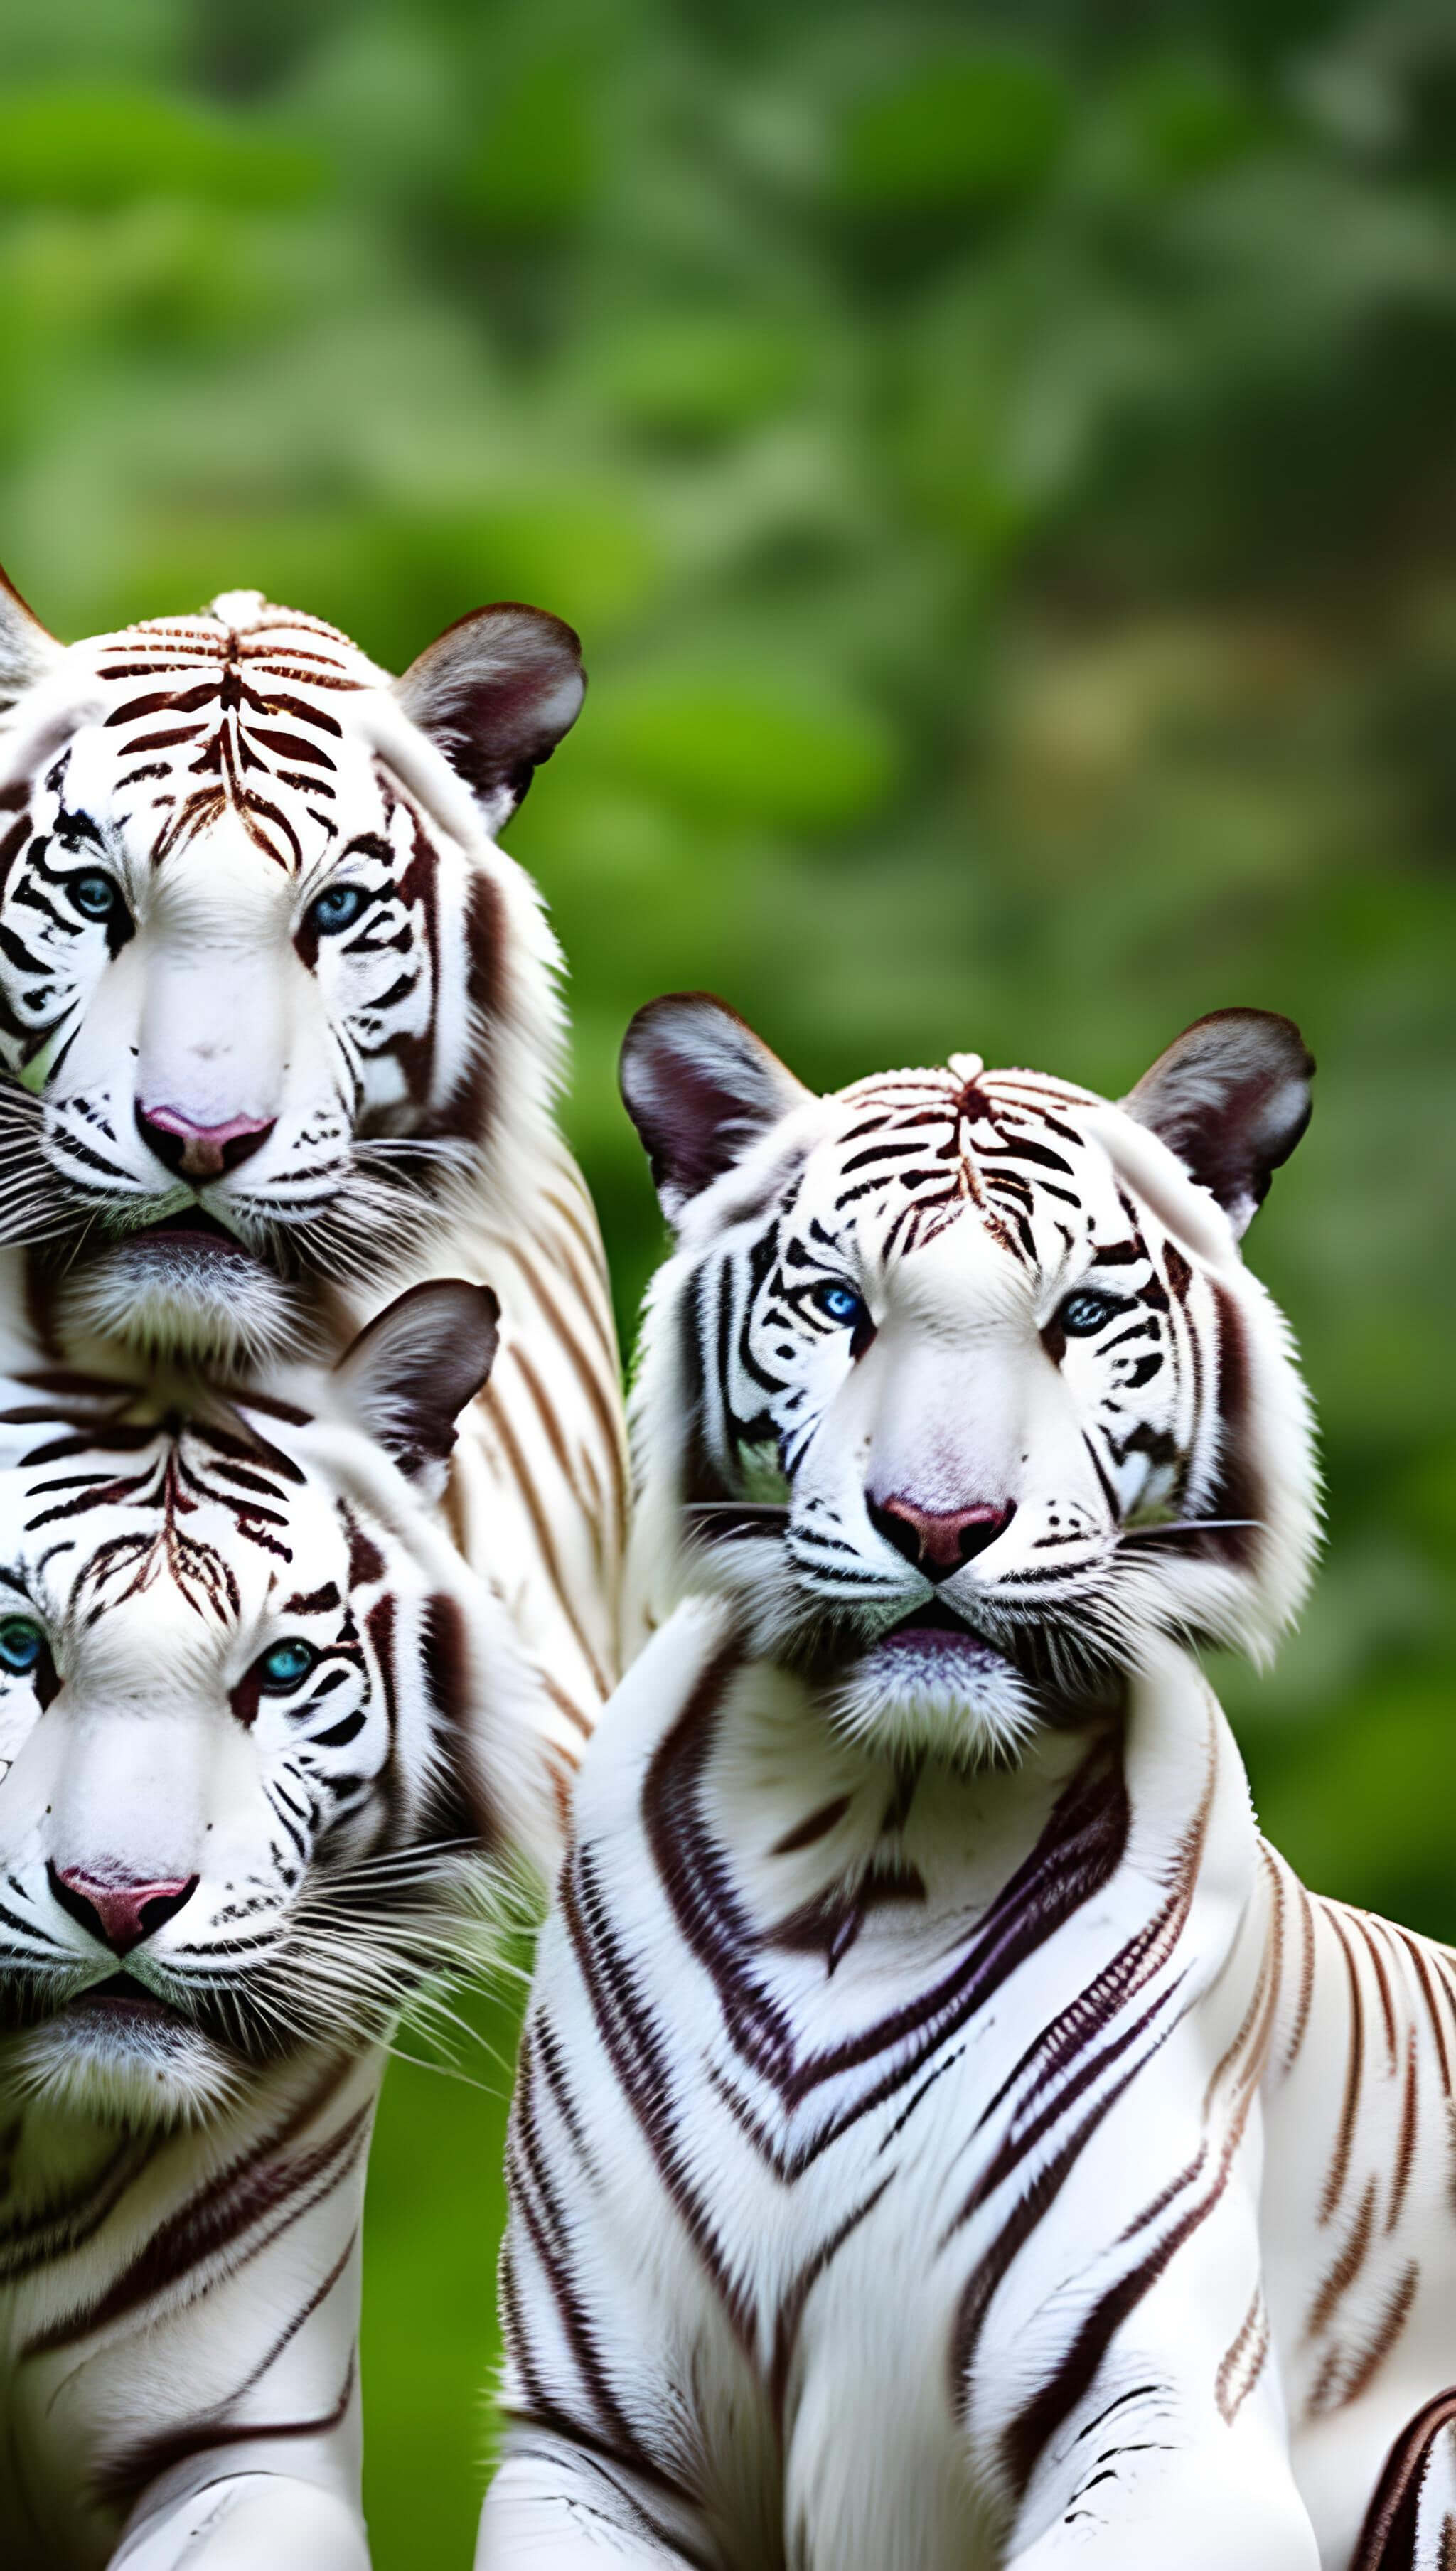 A picture of three white tigers with blue eyes. - Tiger, beautiful, nature